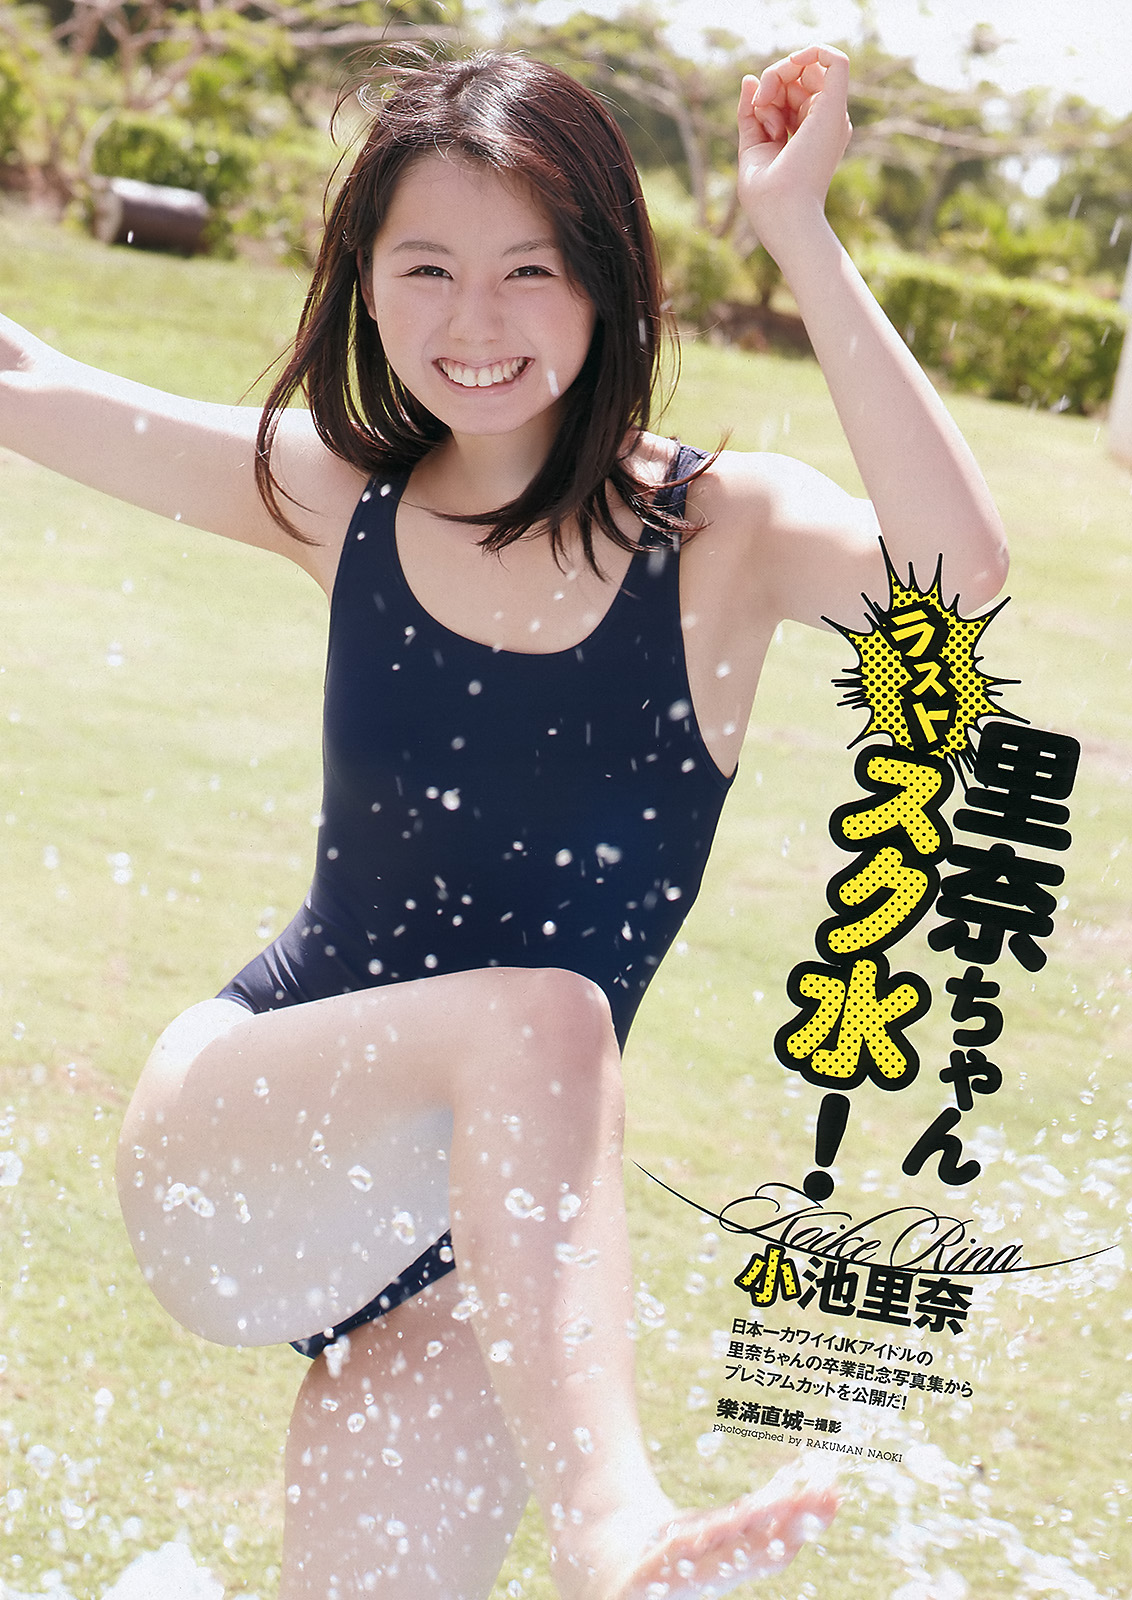 Rina Koike graduated from high school Look out for school water and gym clothes! Burn it in your eyes 2012001